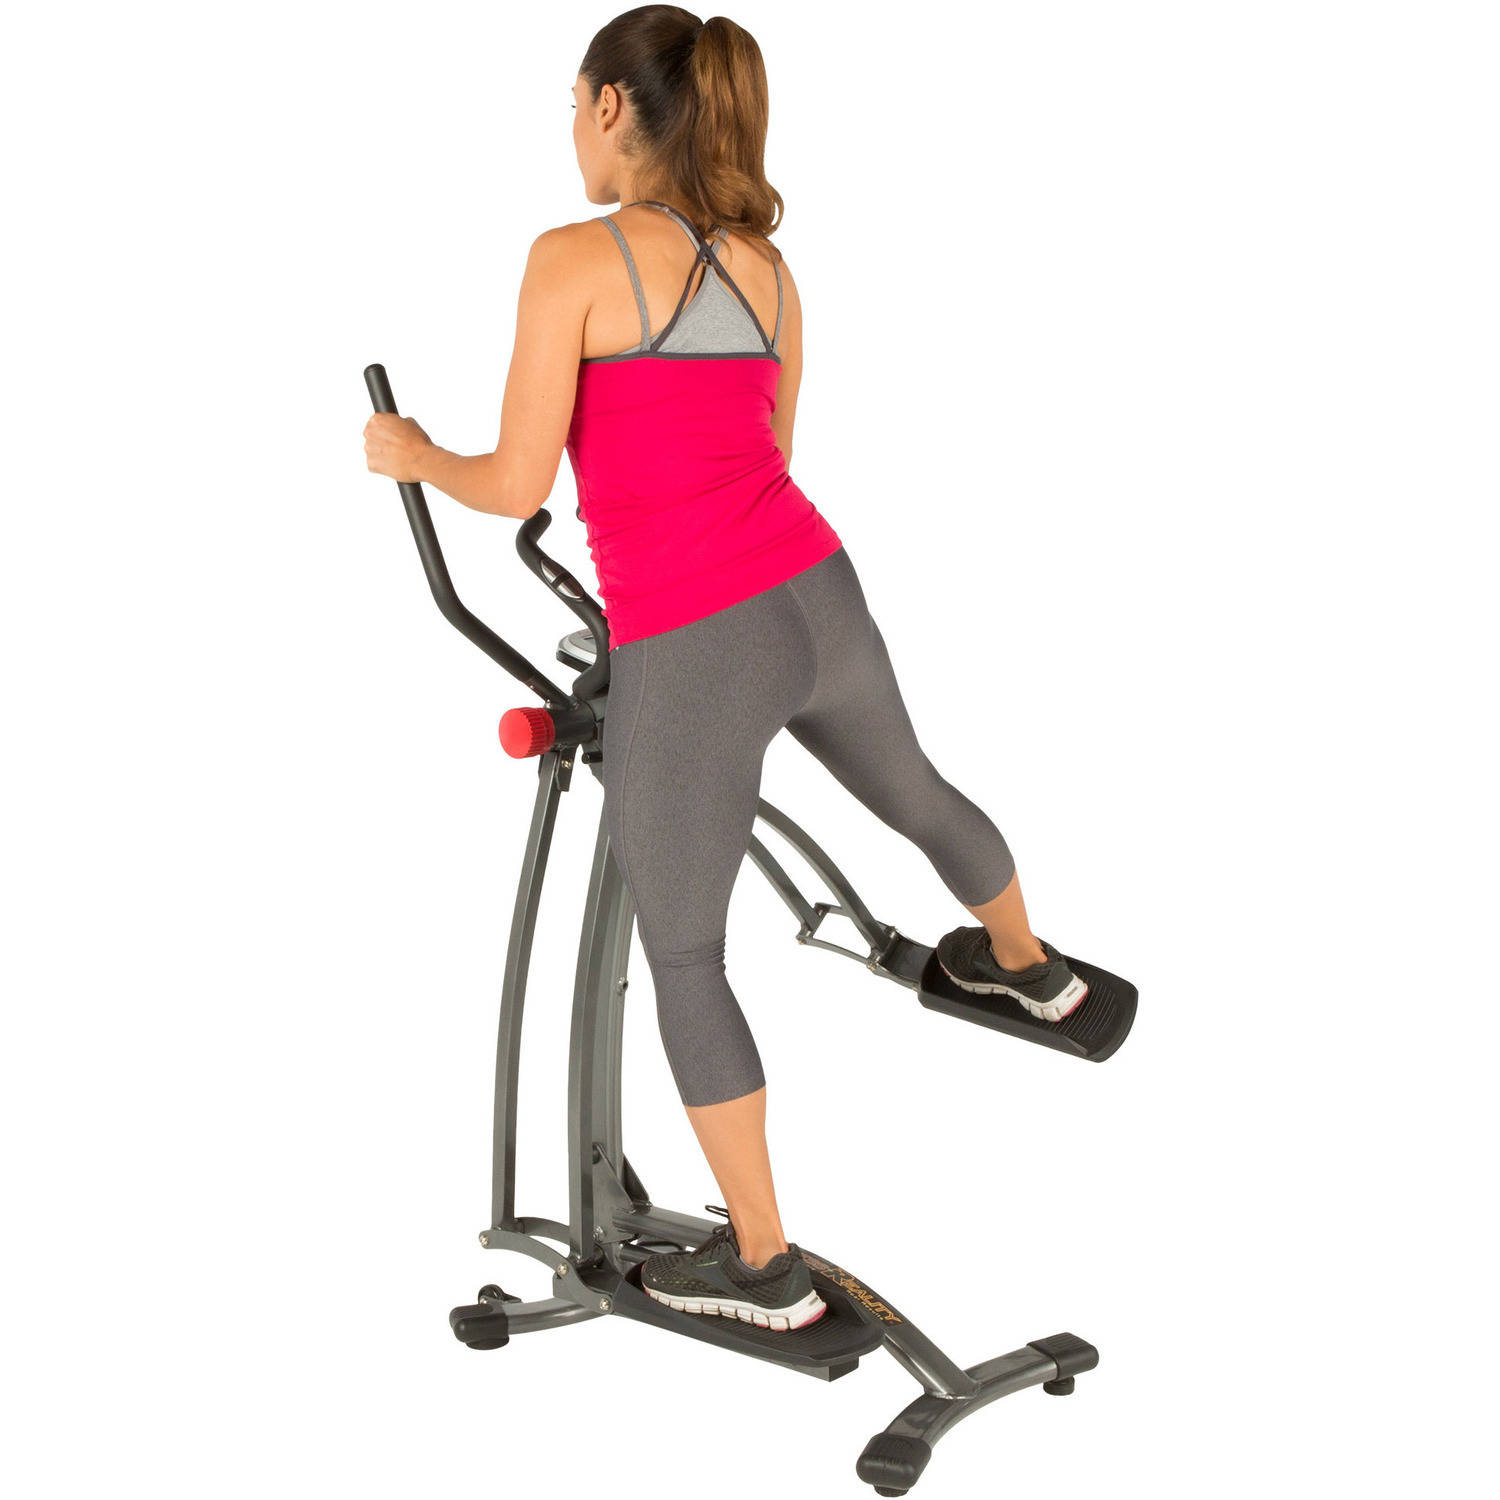 Fitness Reality Multi-Direction Elliptical Cloud Walker X1 with Pulse Sensors - image 21 of 31